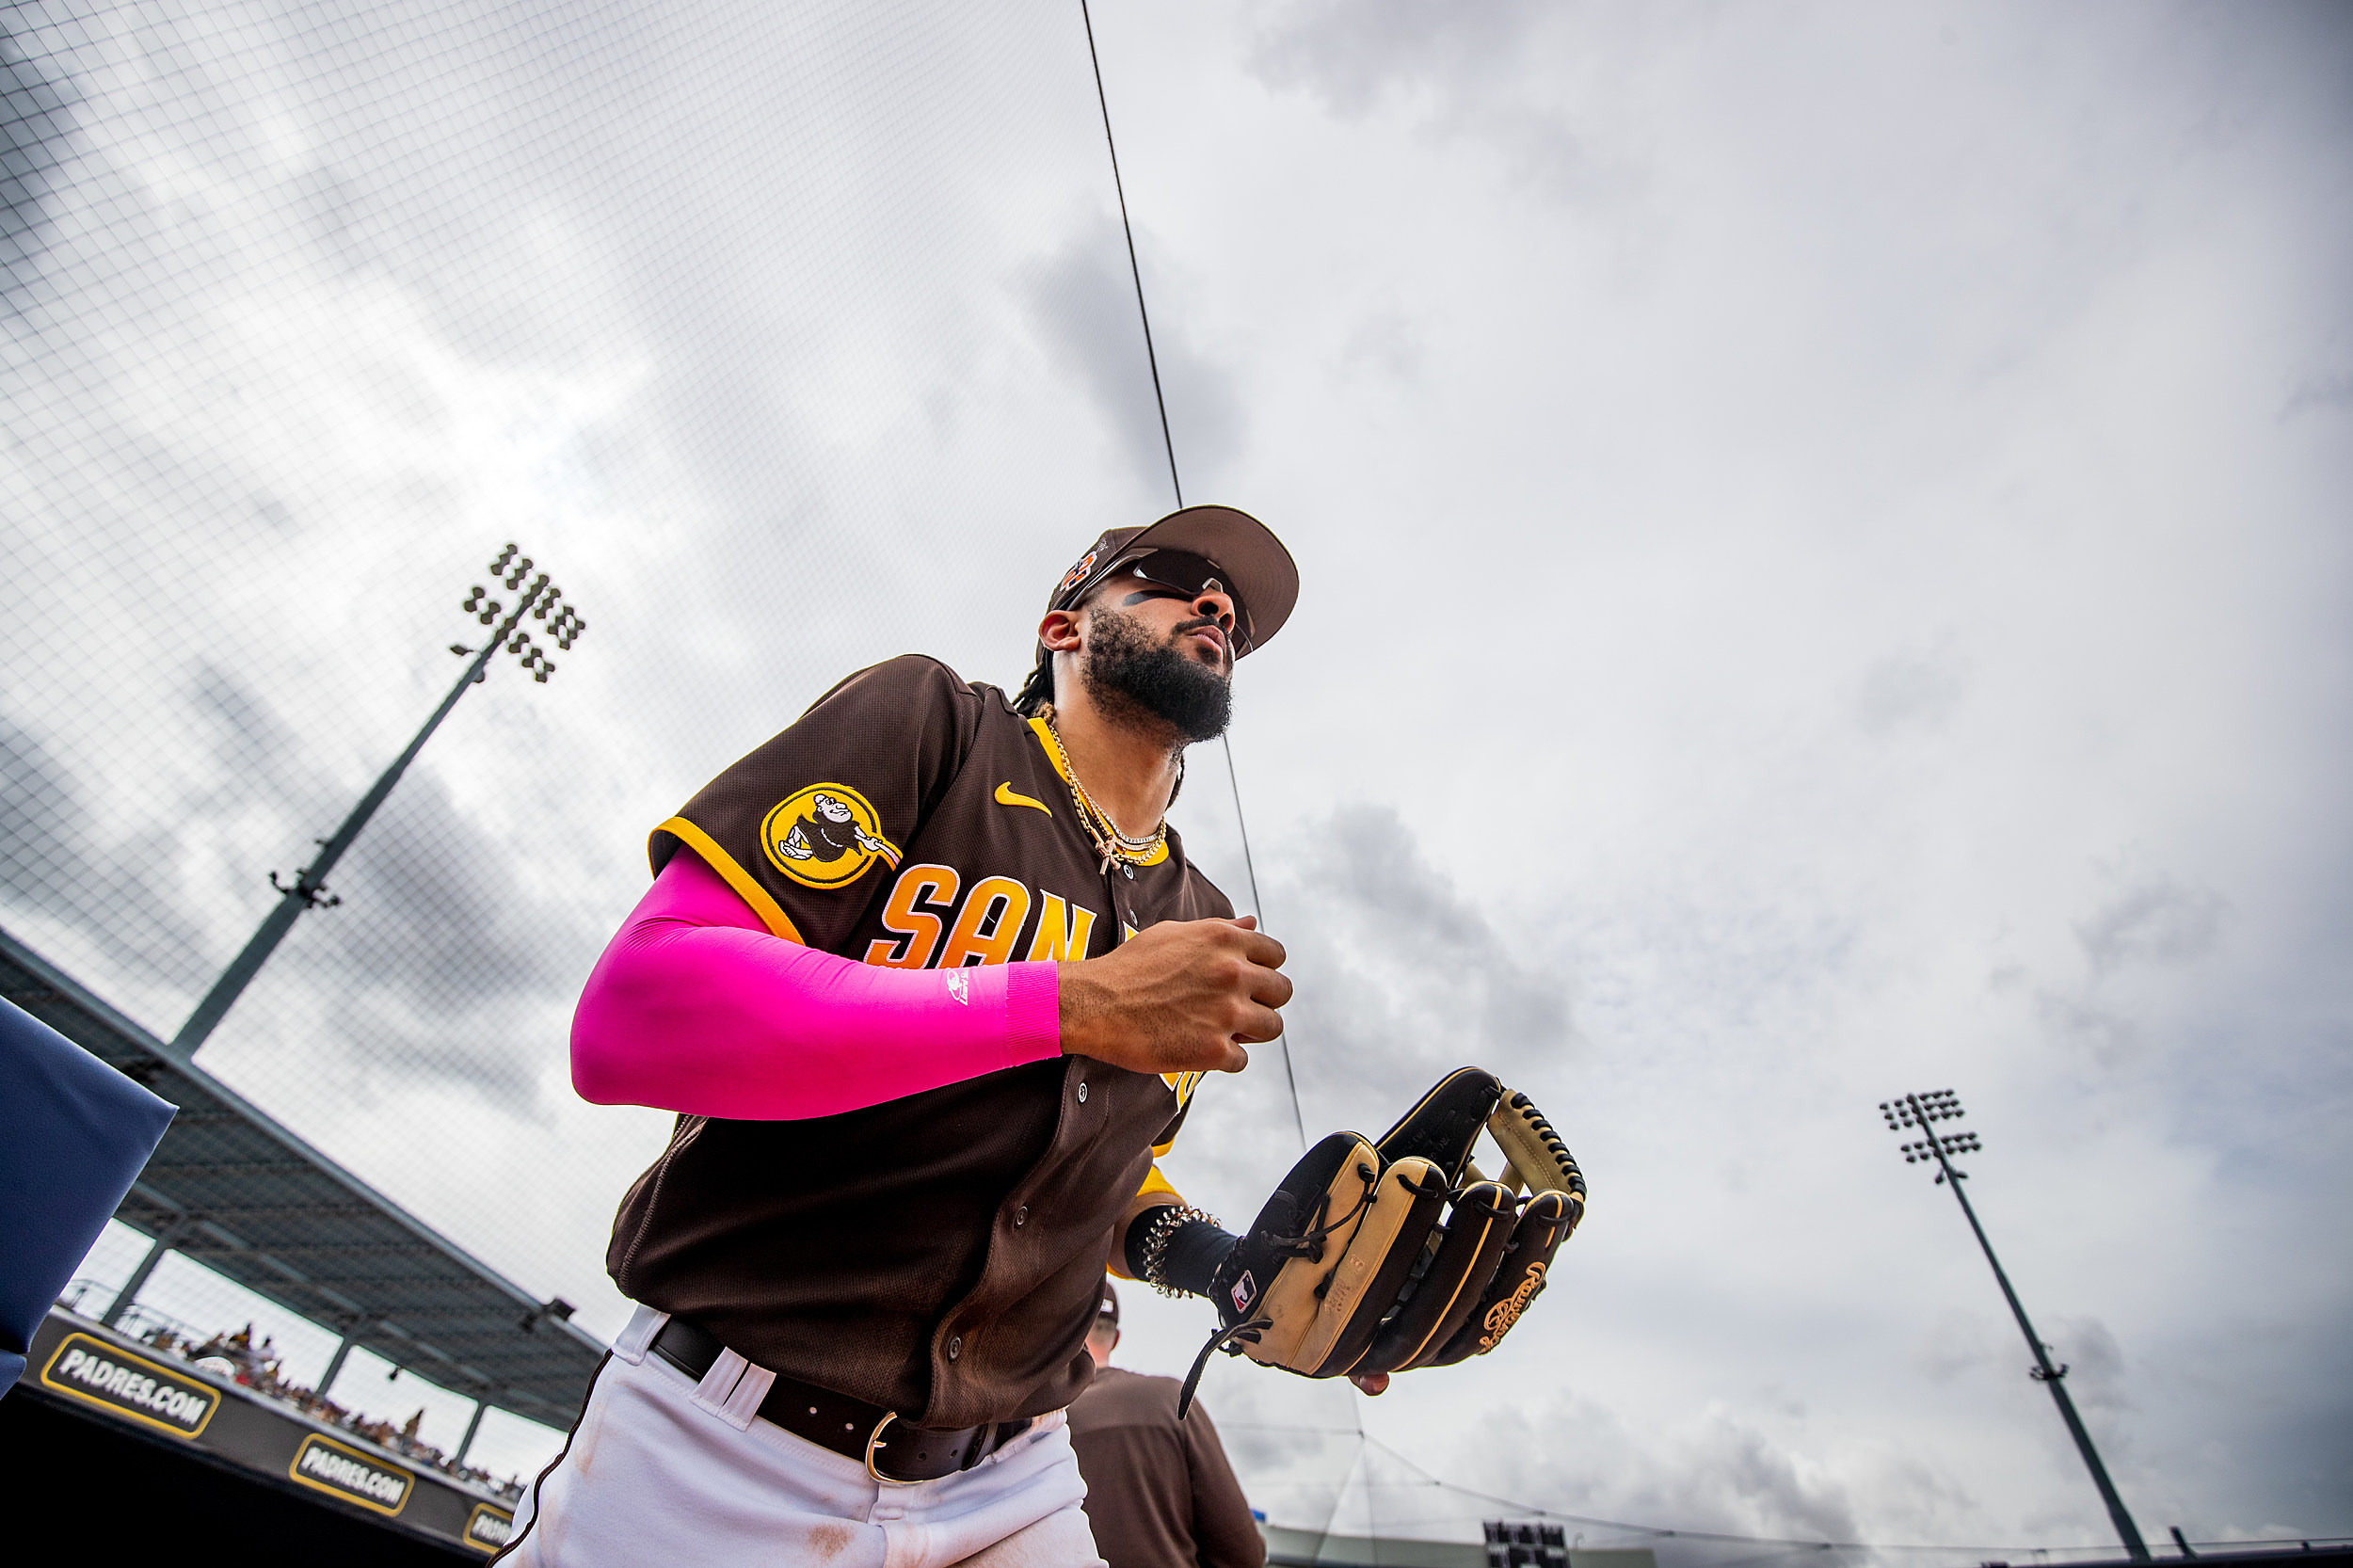 Watch as Tatis Jr. plays for the Chihuahuas during his rehab